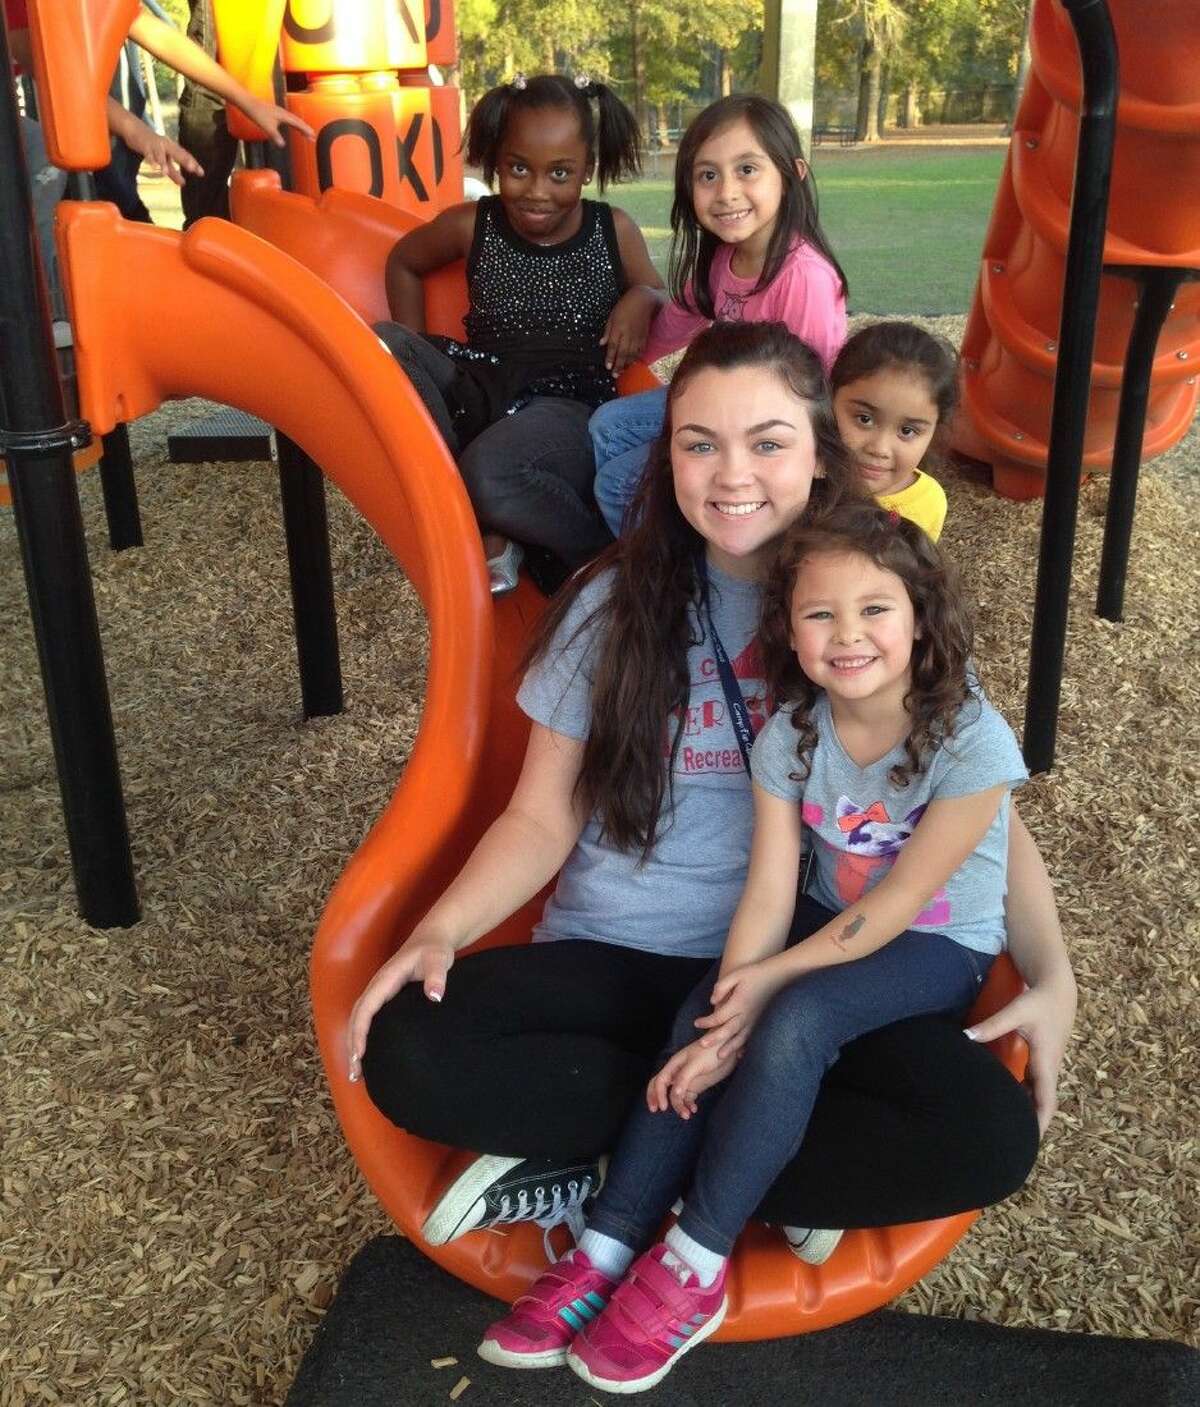 The City of Conroe provides one of the best and most affordable after school programs in the area. We provide a fun, safe, and supervised place for kids after school at nine convenient locations. Trained and caring staff will deliver a snack, homework assistance and recreational activities to 6:30 p.m., or until parent’s pickup.